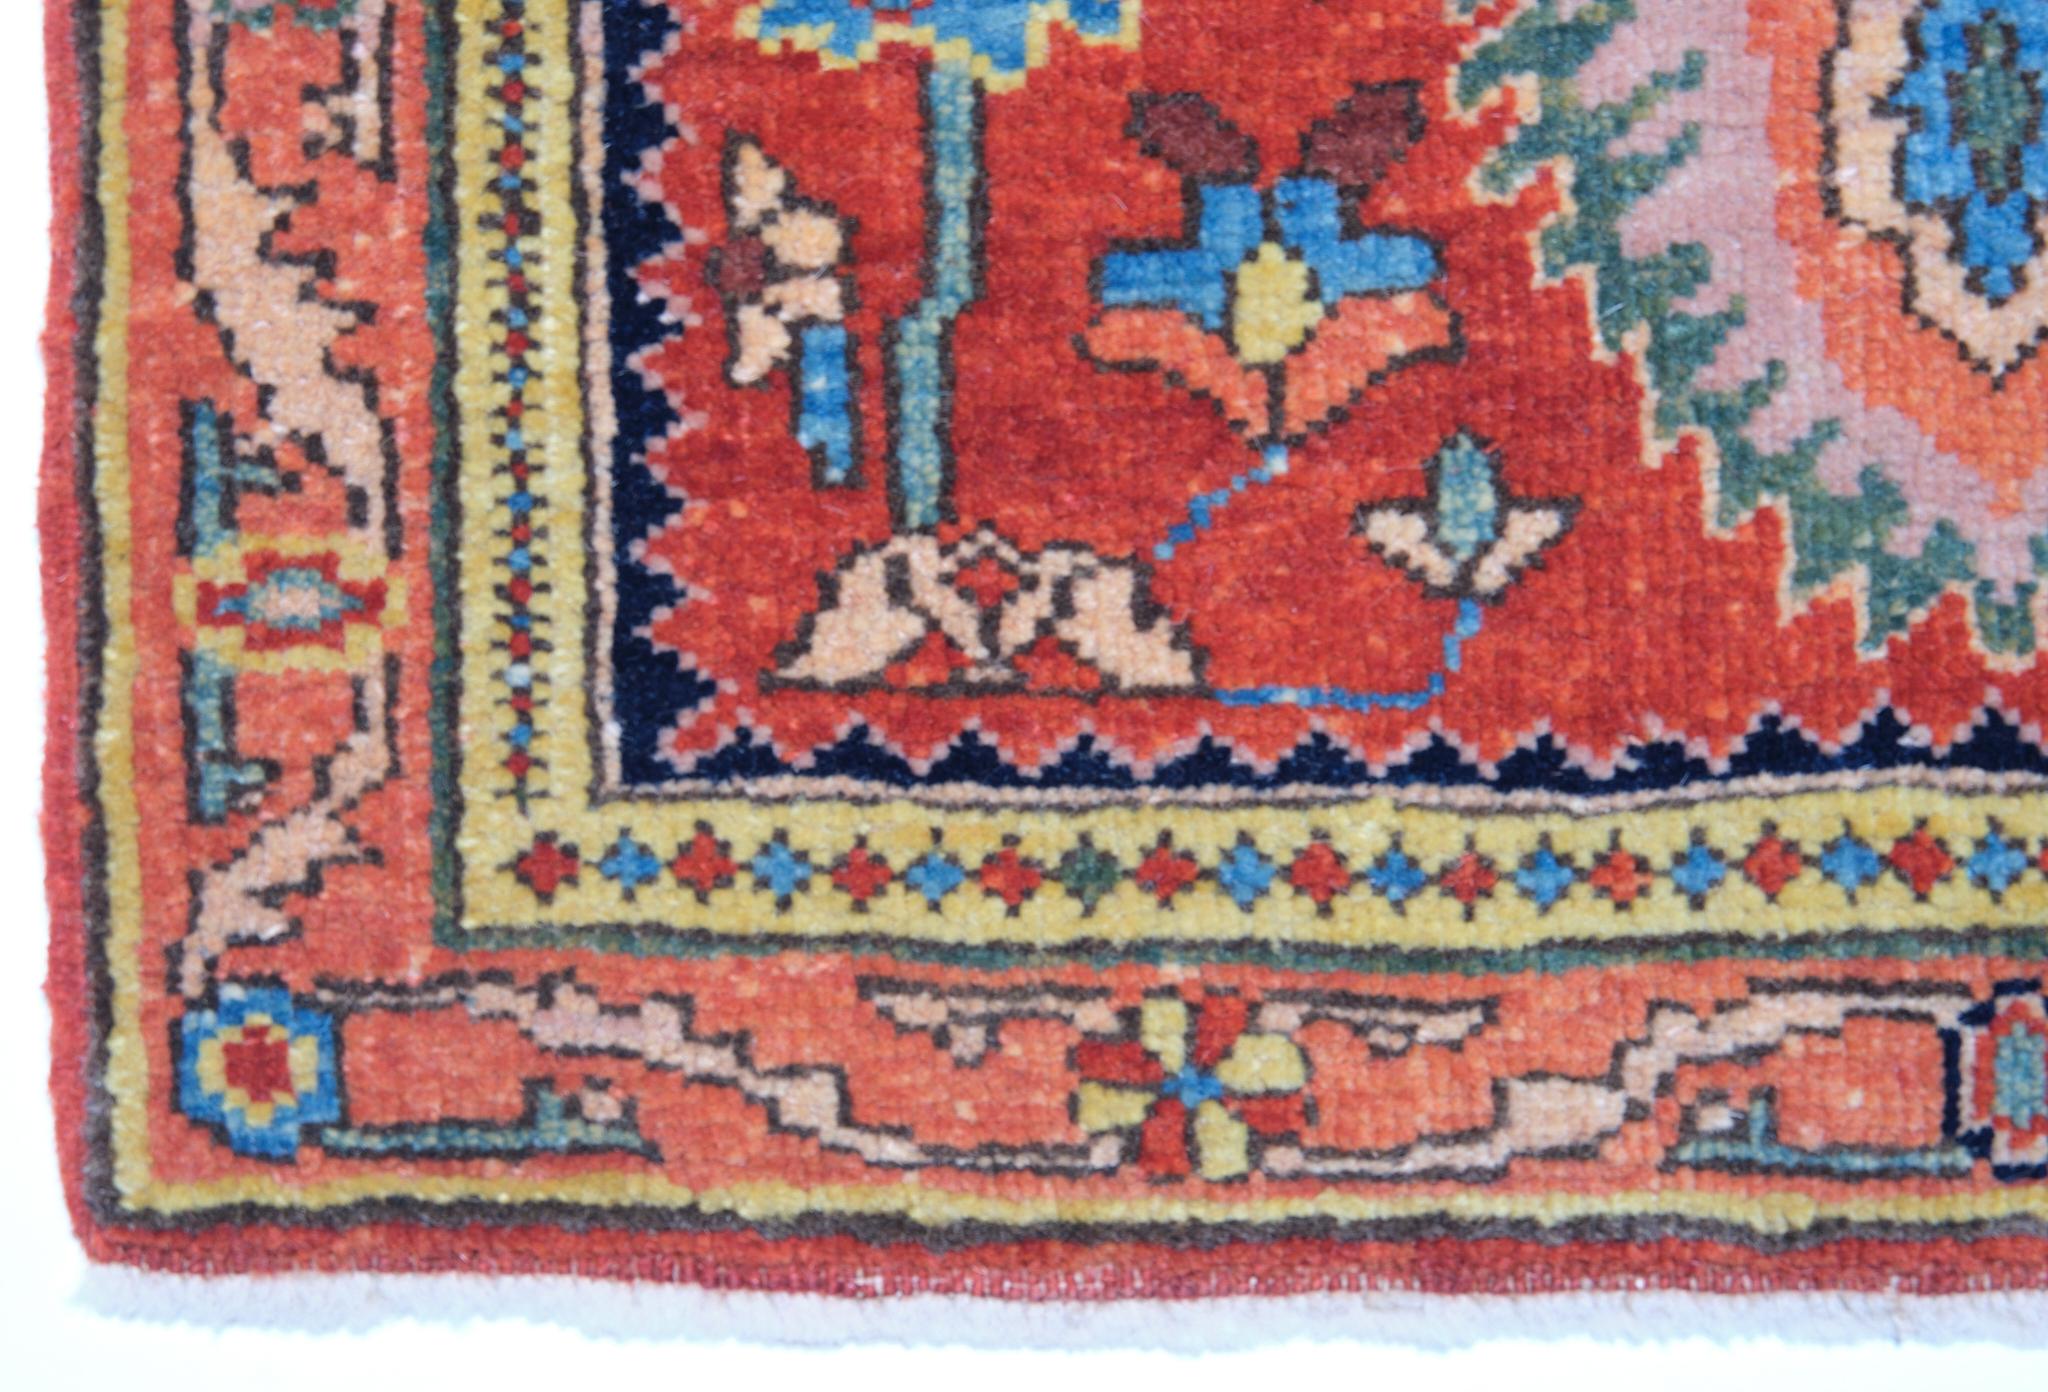 The most dramatic of the Gerous ( Garrus, Gerus, Garus ) carpets are those with an “asymmetric” design. Only a section of the original is shown, in the same way, many Lotto carpets were woven. It is difficult to guess the Size of these carpets from